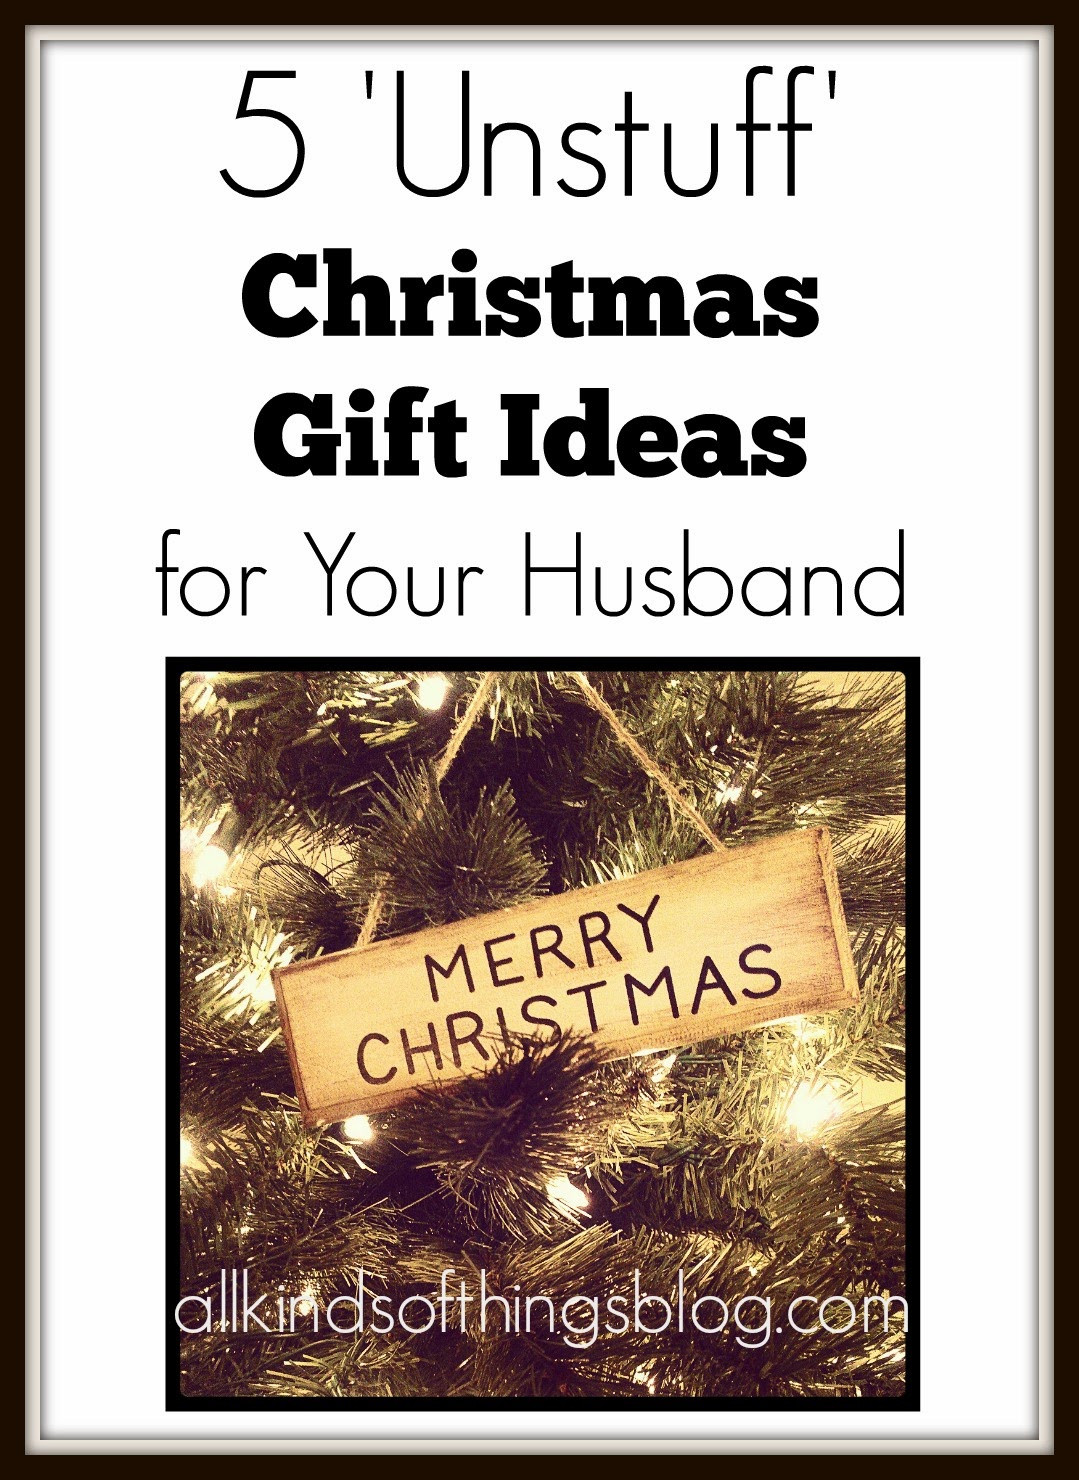 Christmas Gift Ideas For My Husband
 All Kinds of Things 5 Unstuff Christmas Gift Ideas for